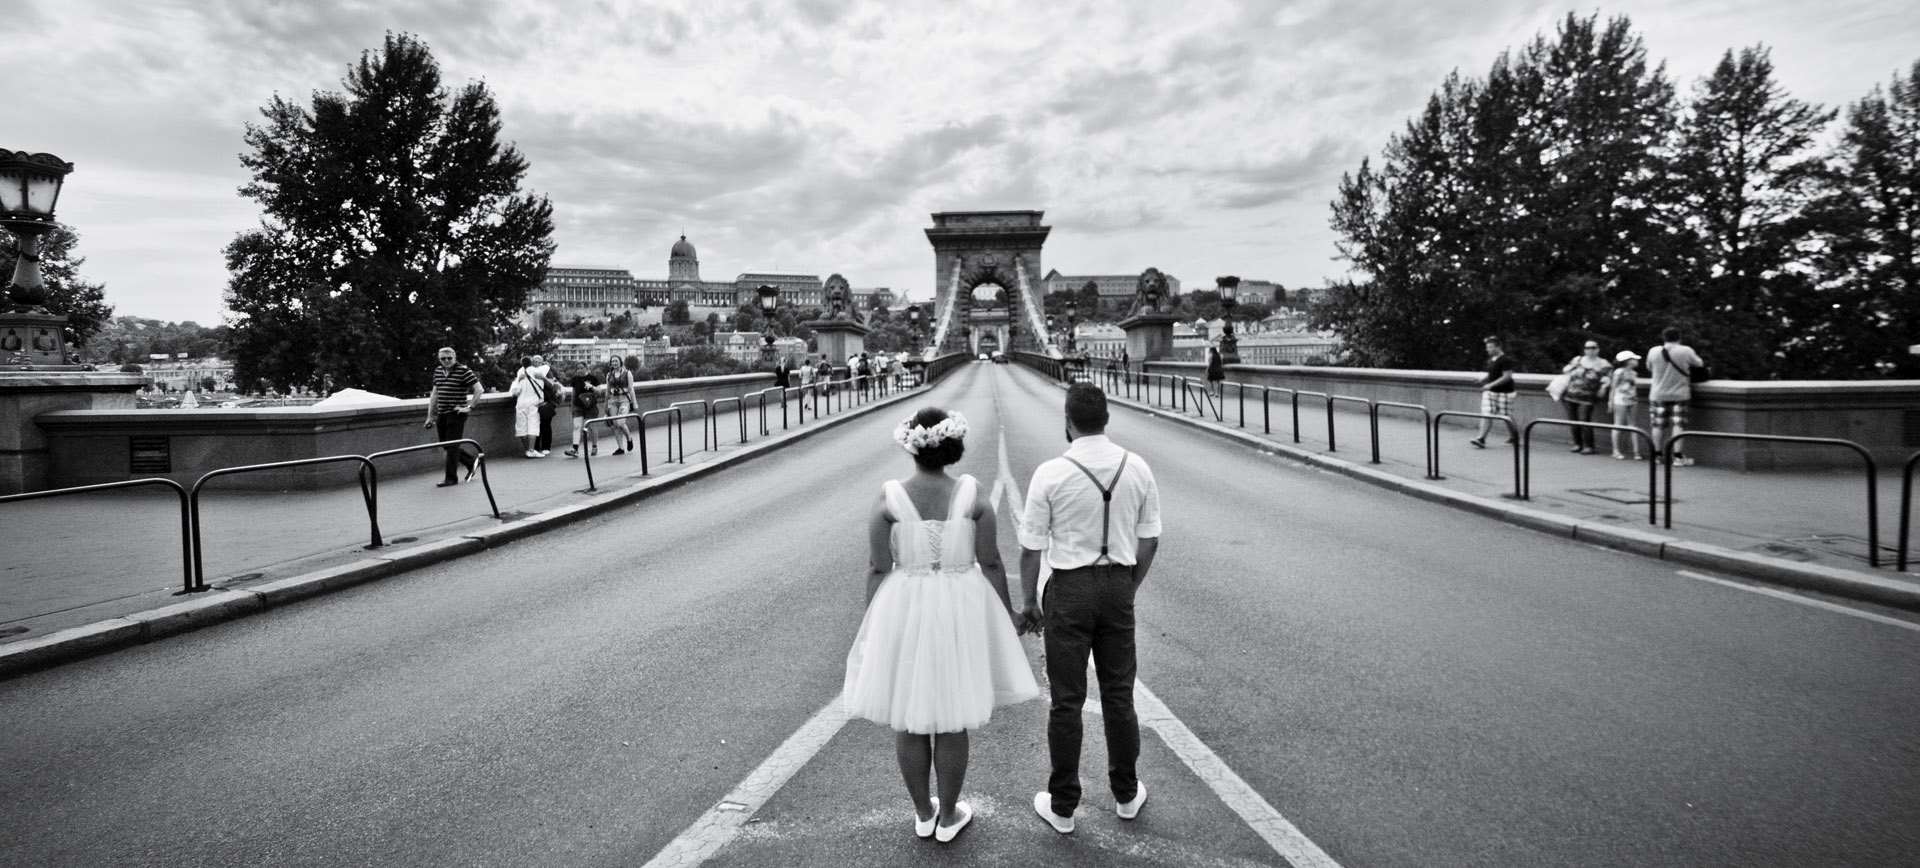 budapest wedding with sightseeing and boat ride